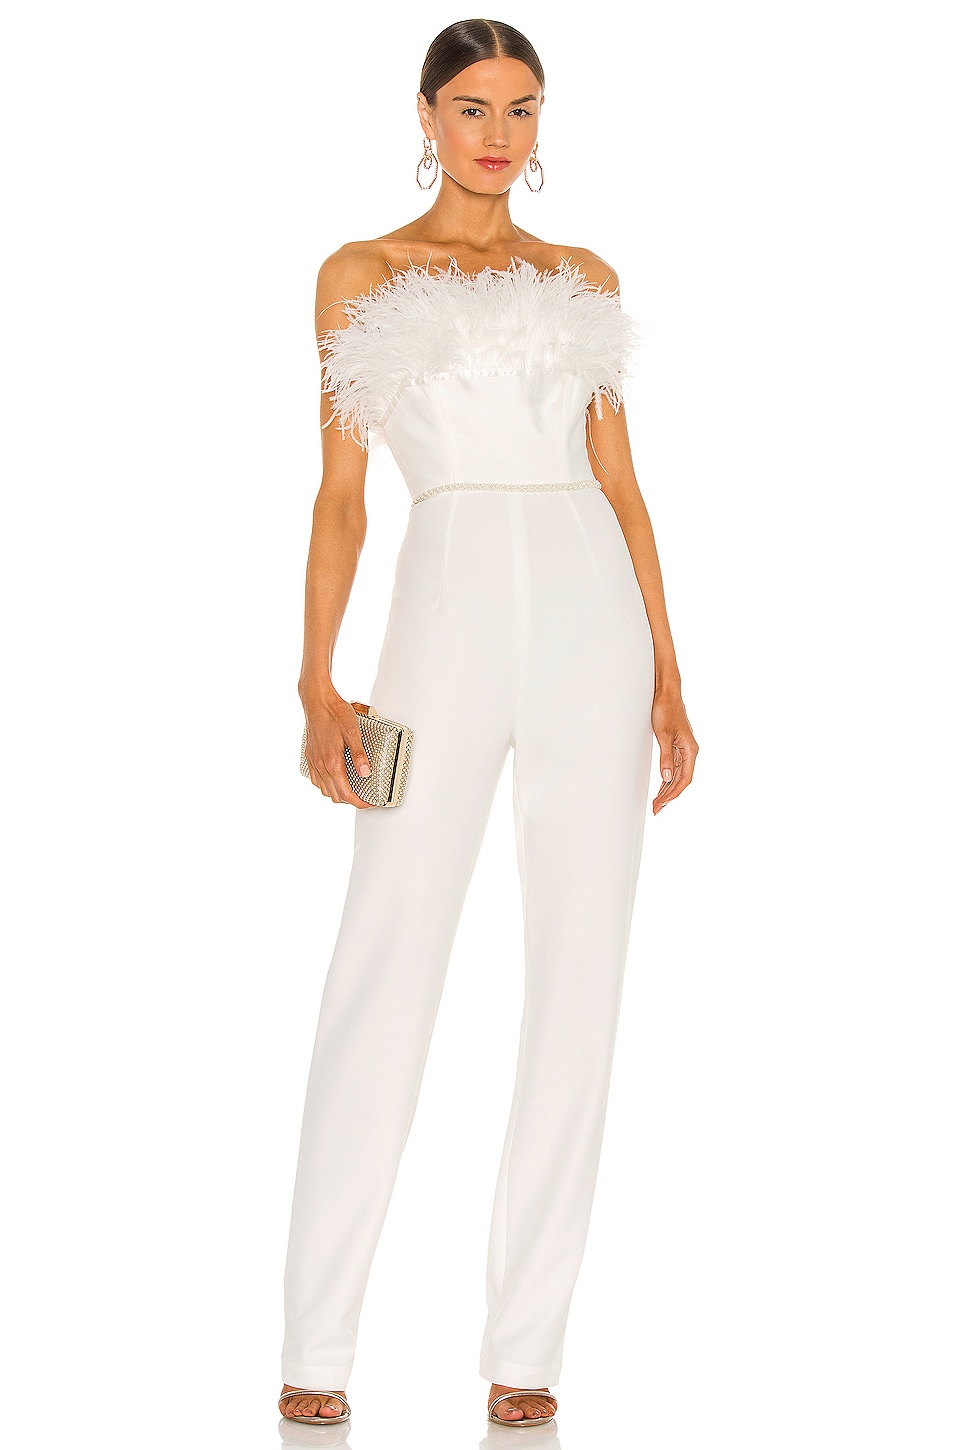 White Designer Strapless Jumpsuit for Evening with Ostrich Feathers